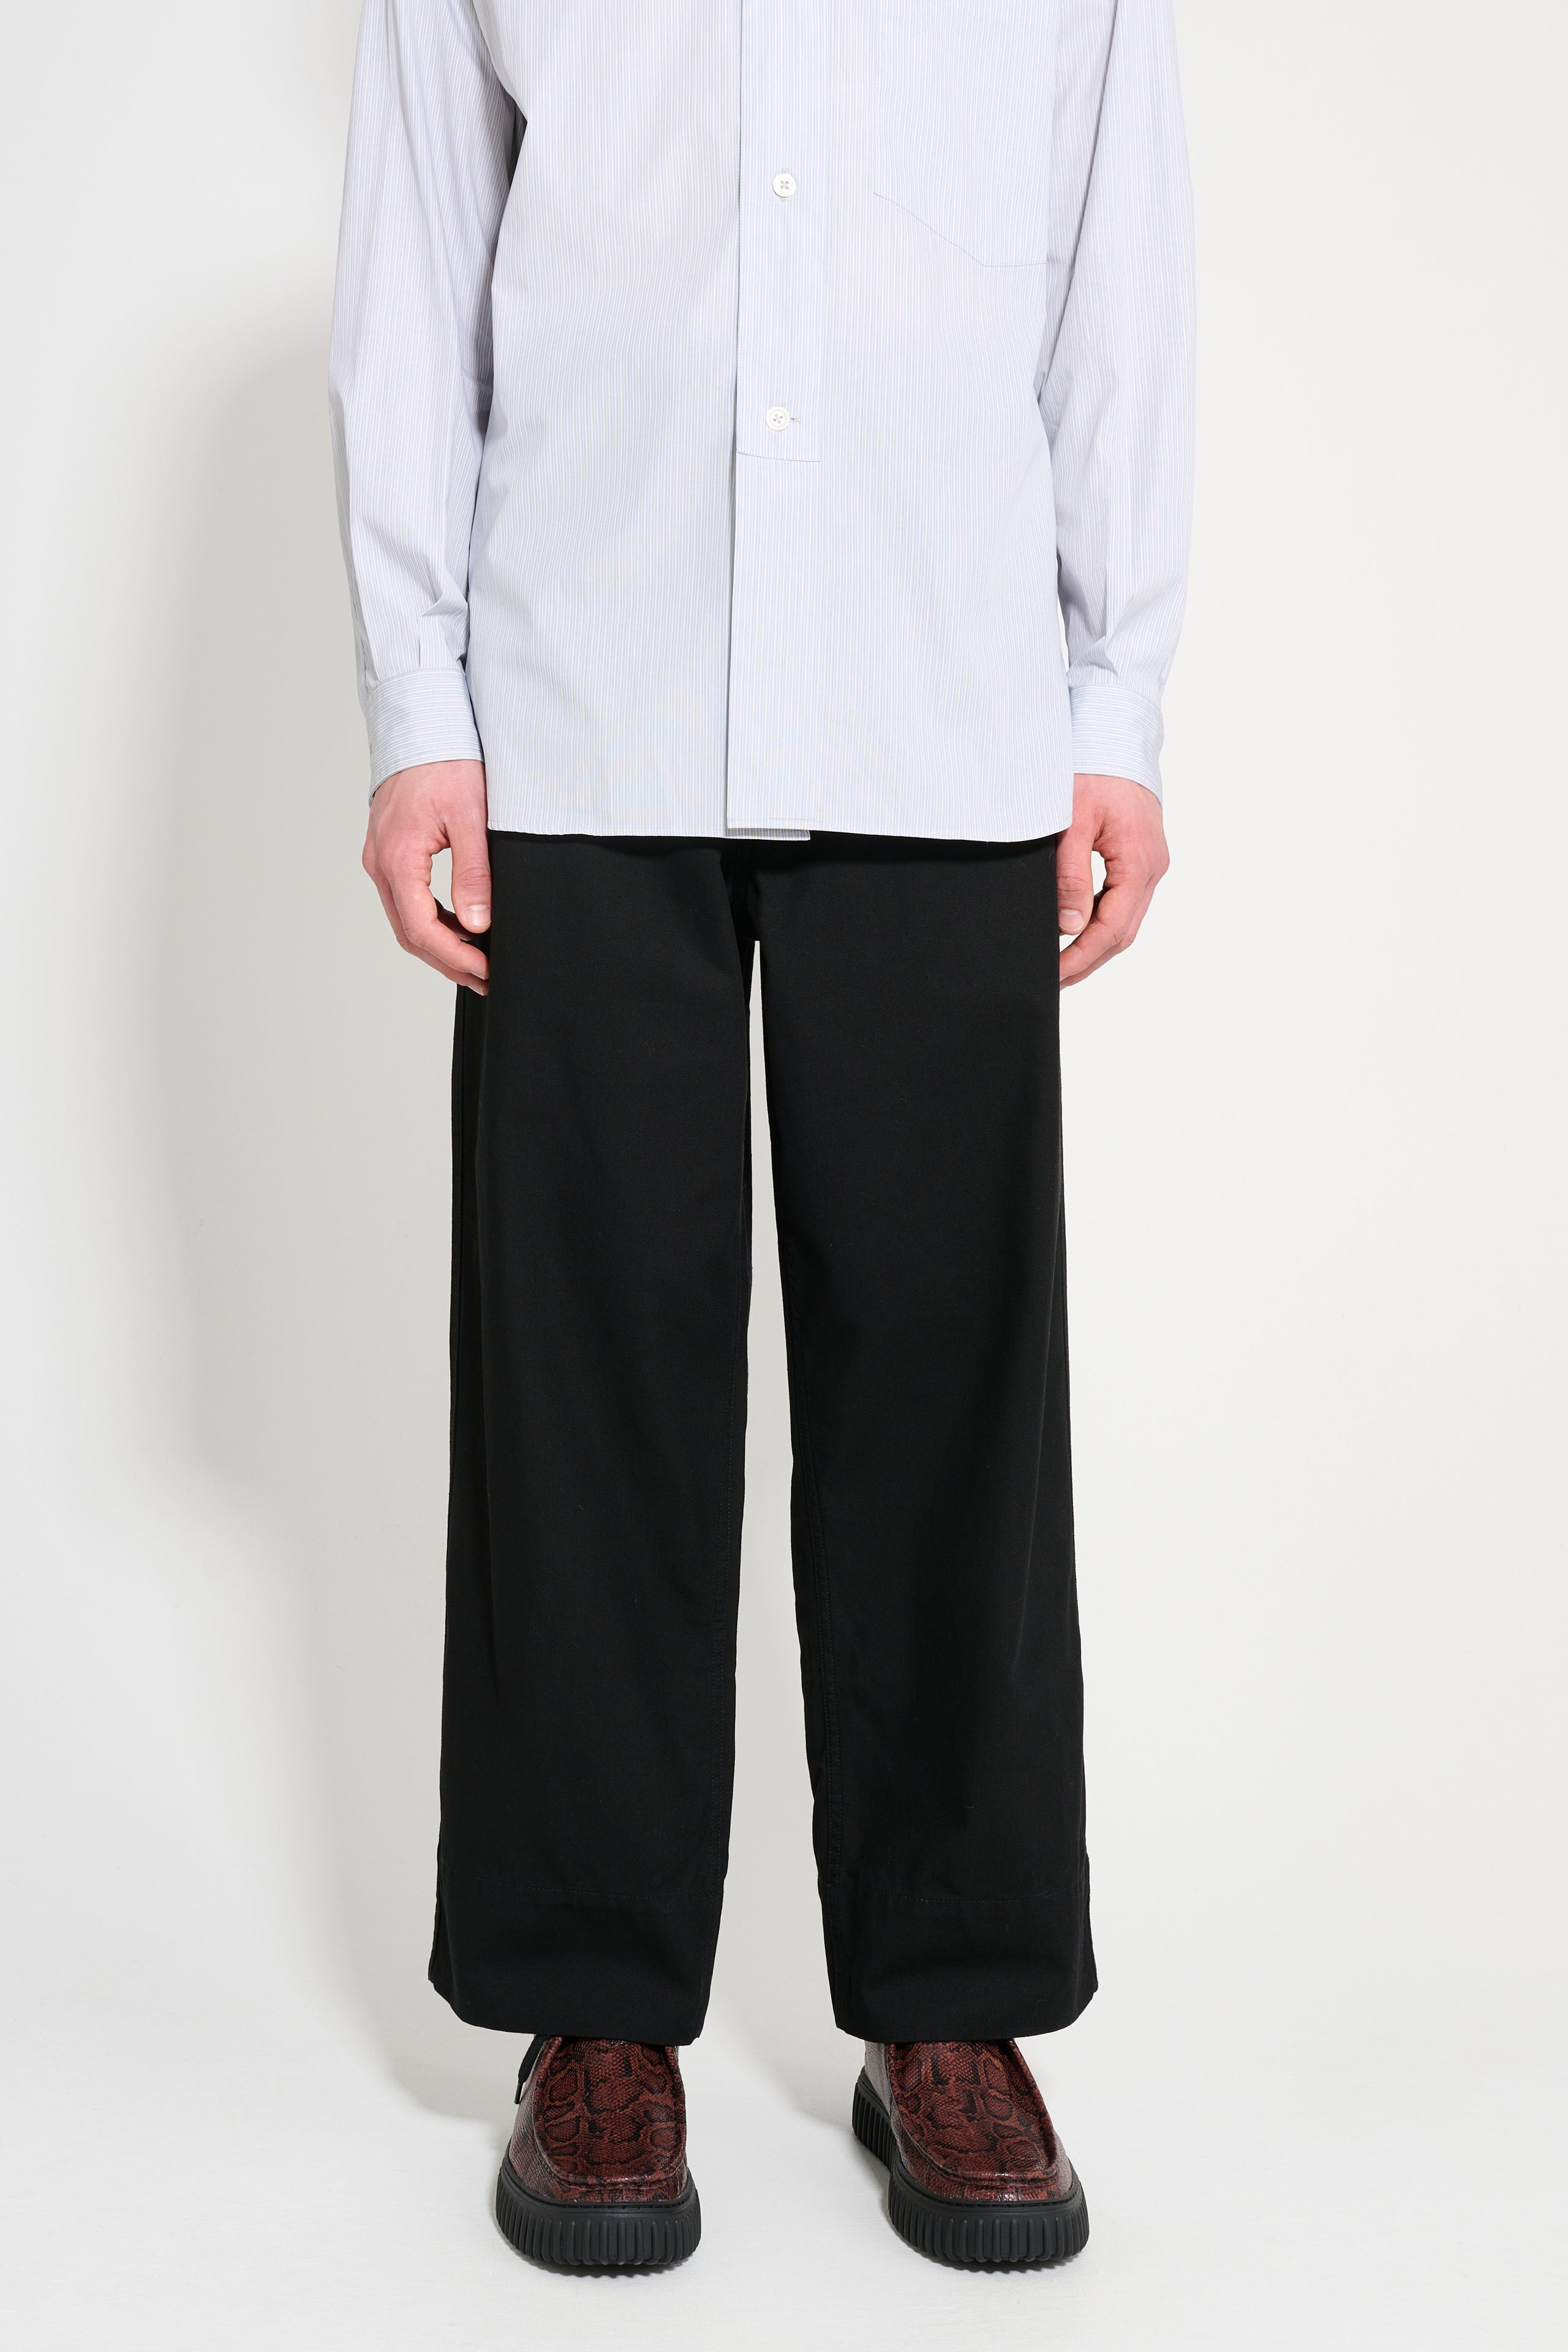 Margaret Howell MHL Painters Trousers Dry Cotton Garbadine Black